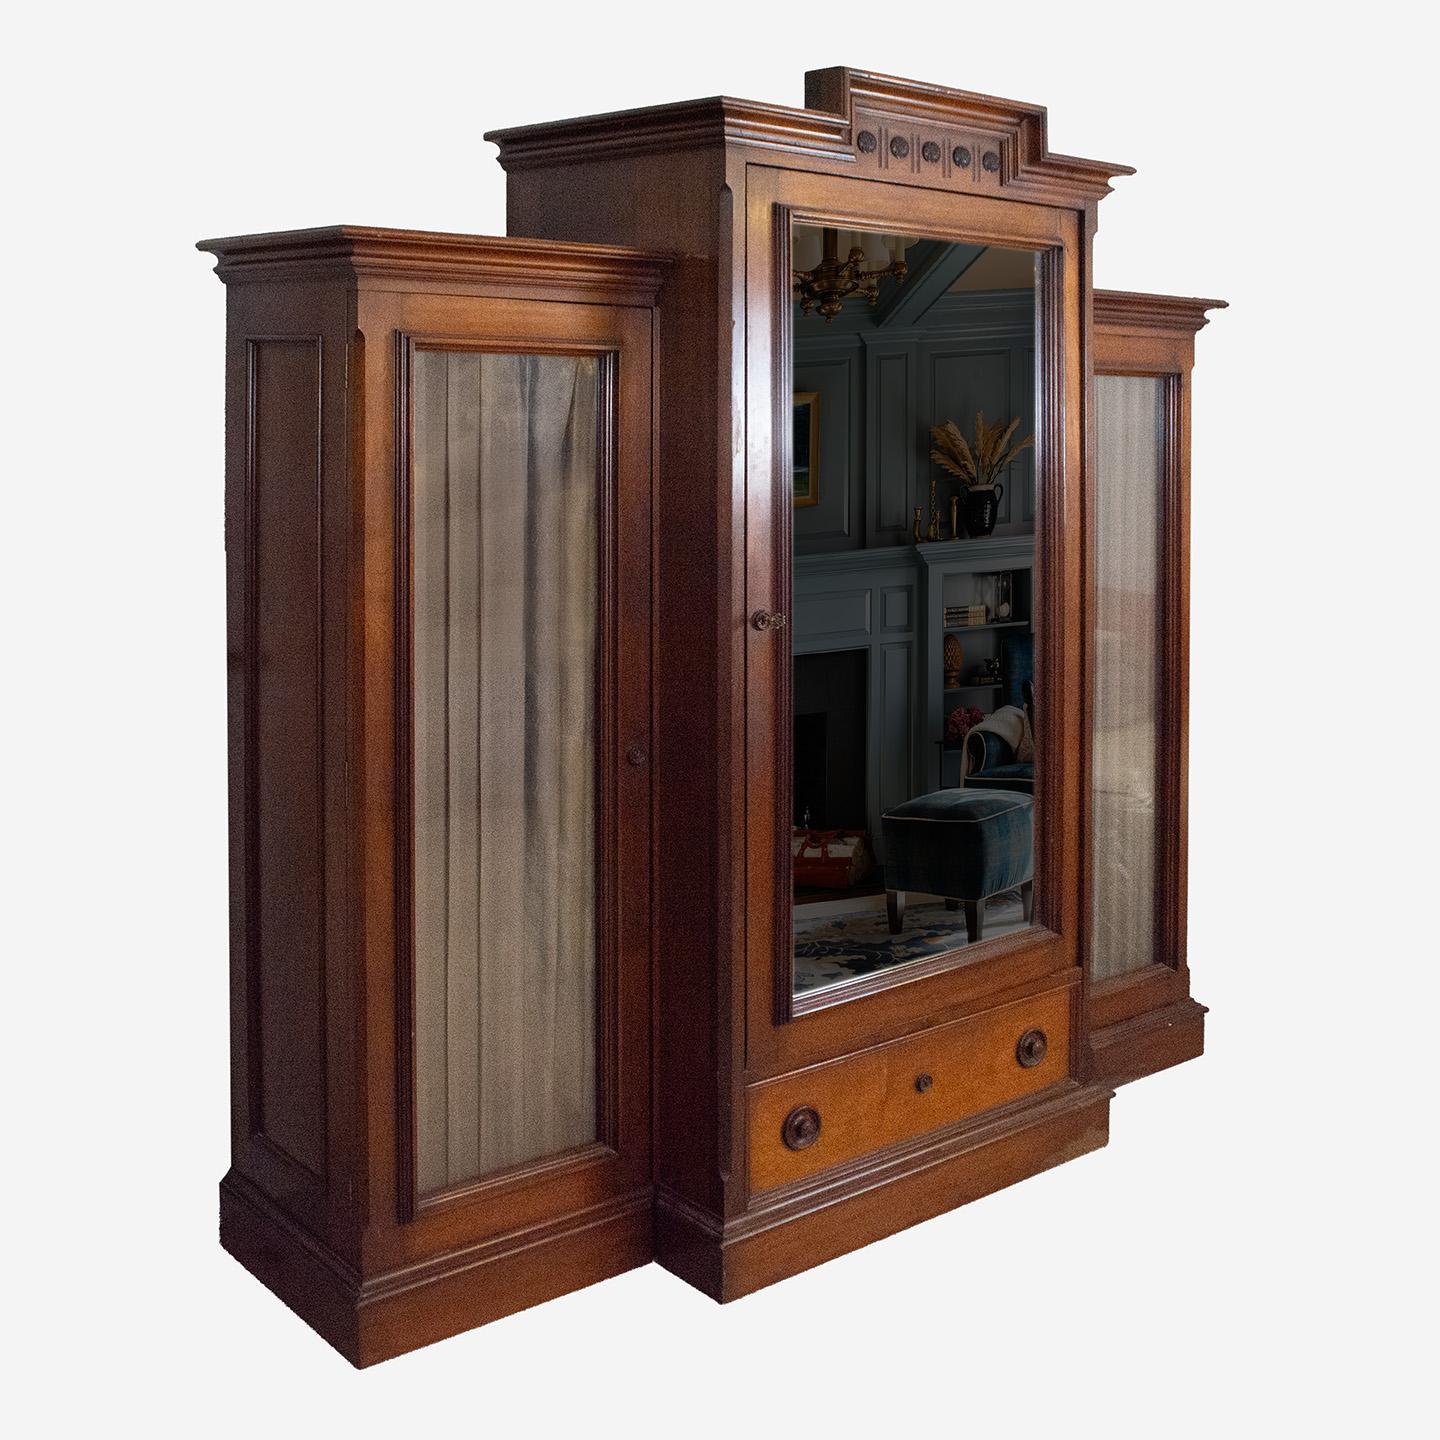 Offering a stunning antique wardrobe with solid joints and hand-cut dovetail work, dating to the late Victorian period, circa 1900. Superior proportion and appearance with walnut fine grain and deep beautiful hues. There are 11 internal drawers